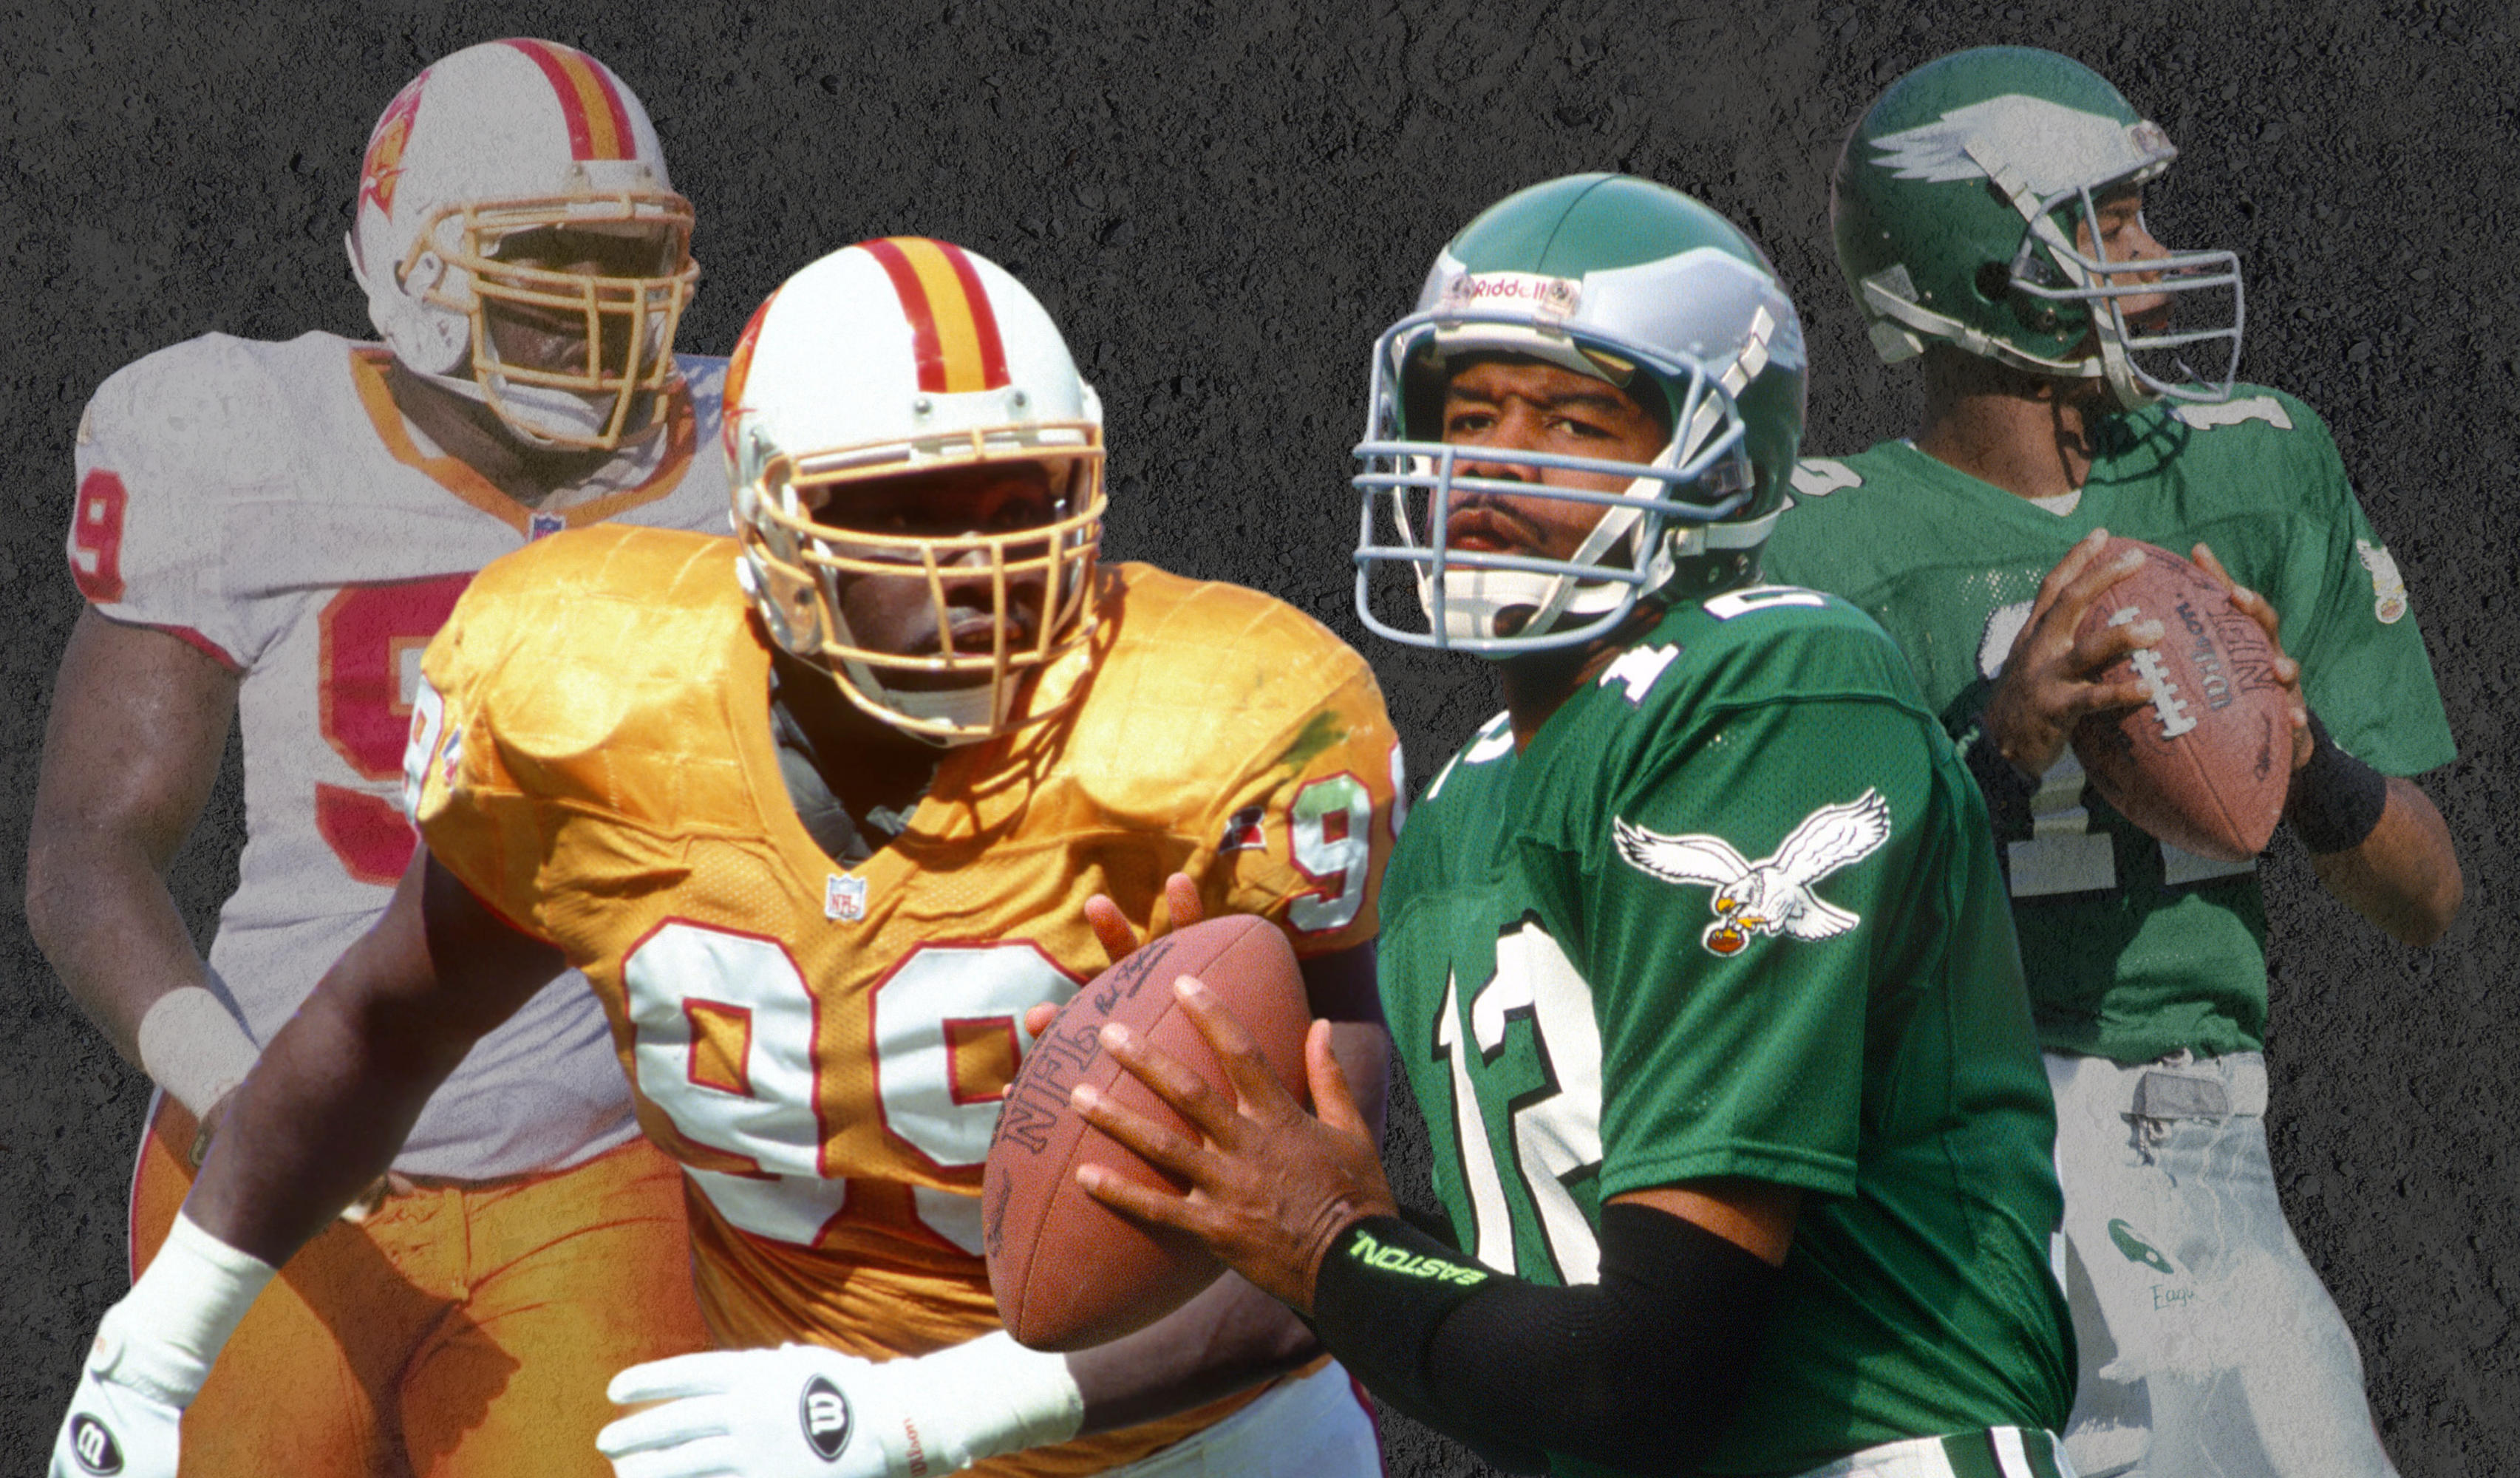 nfl uniforms through the years